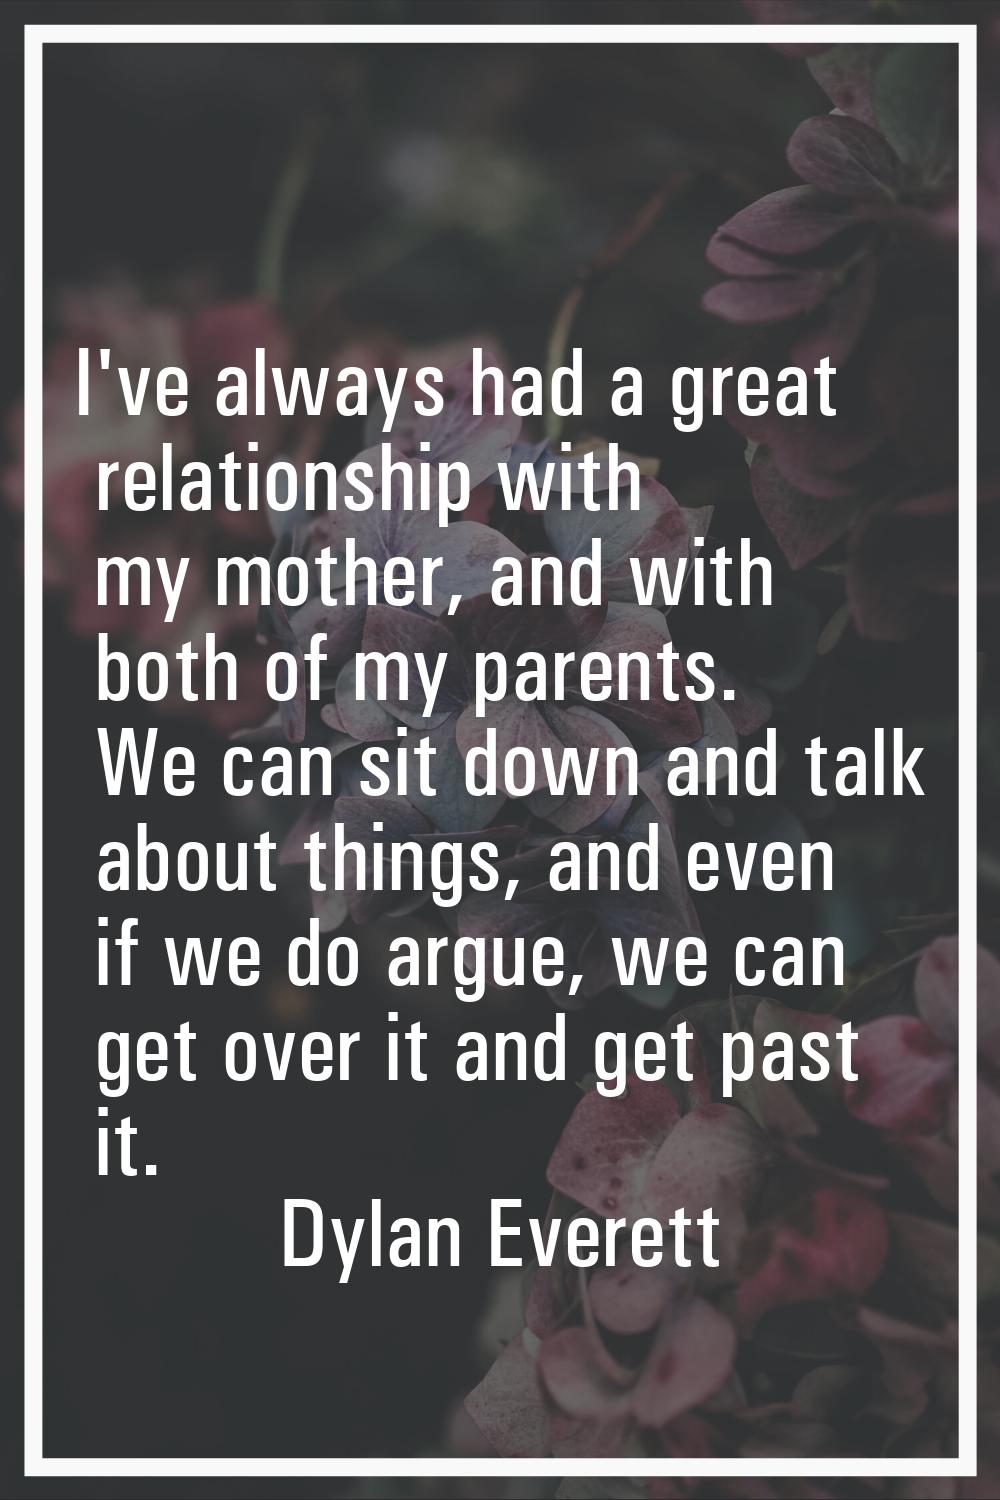 I've always had a great relationship with my mother, and with both of my parents. We can sit down a